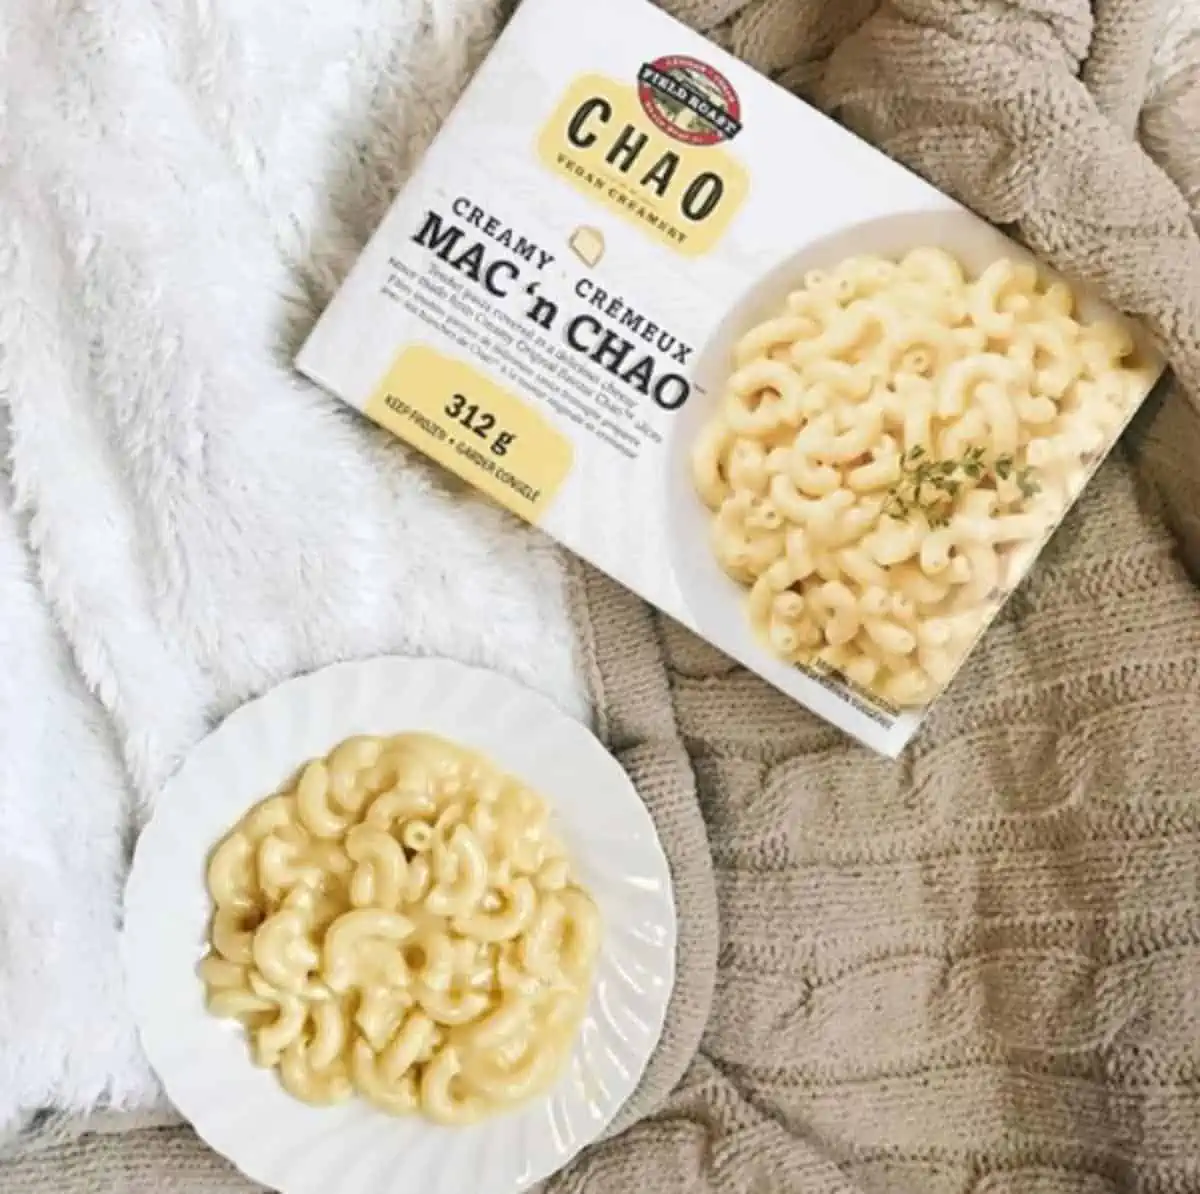 A bowl of dairy free mac and cheese next to a box of Field Roast Mac & Chao.